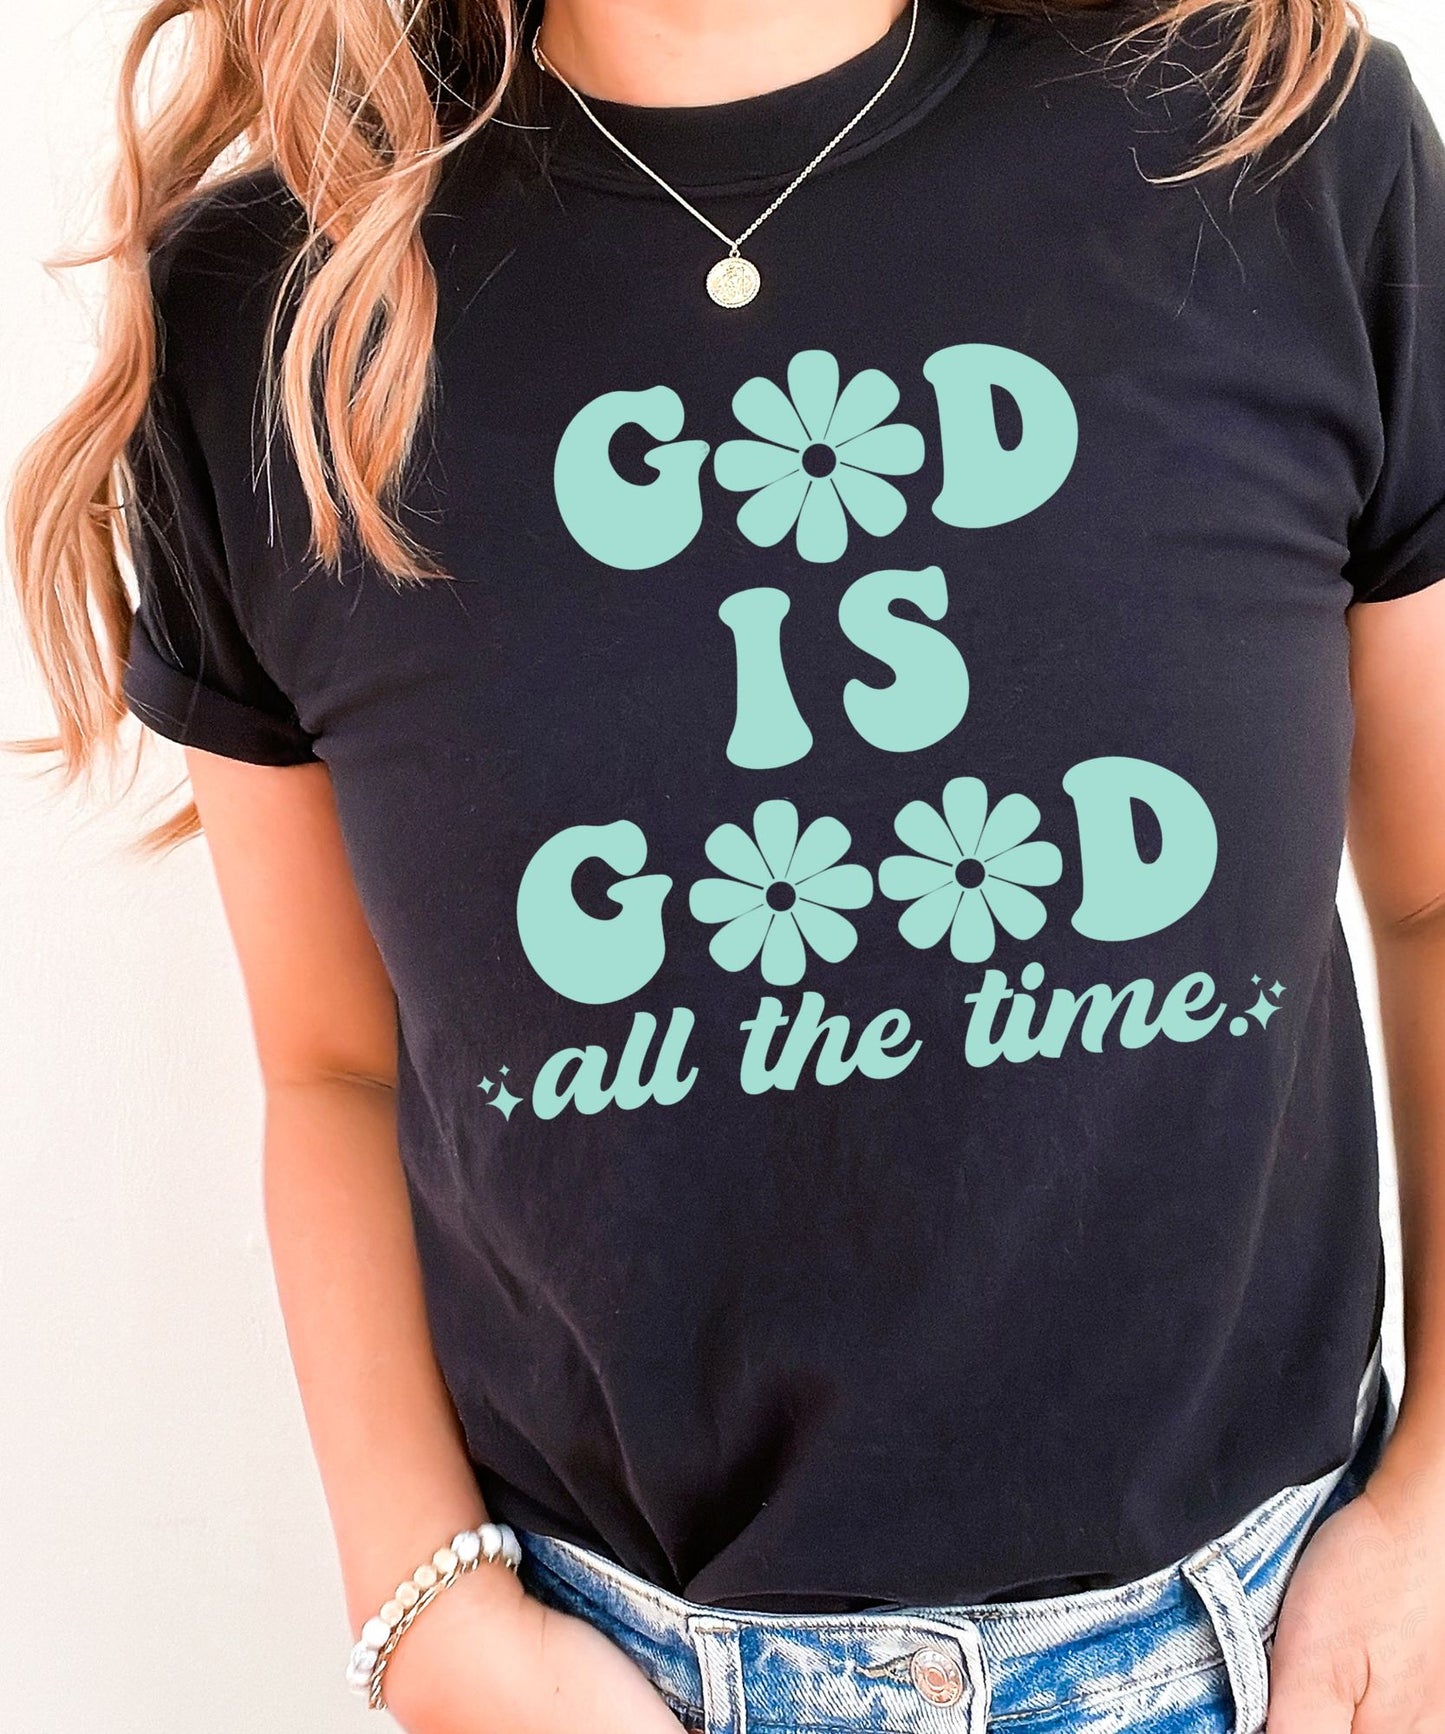 RTS - God is good all the time  - ADULT SCREEN PRINT TRANSFER